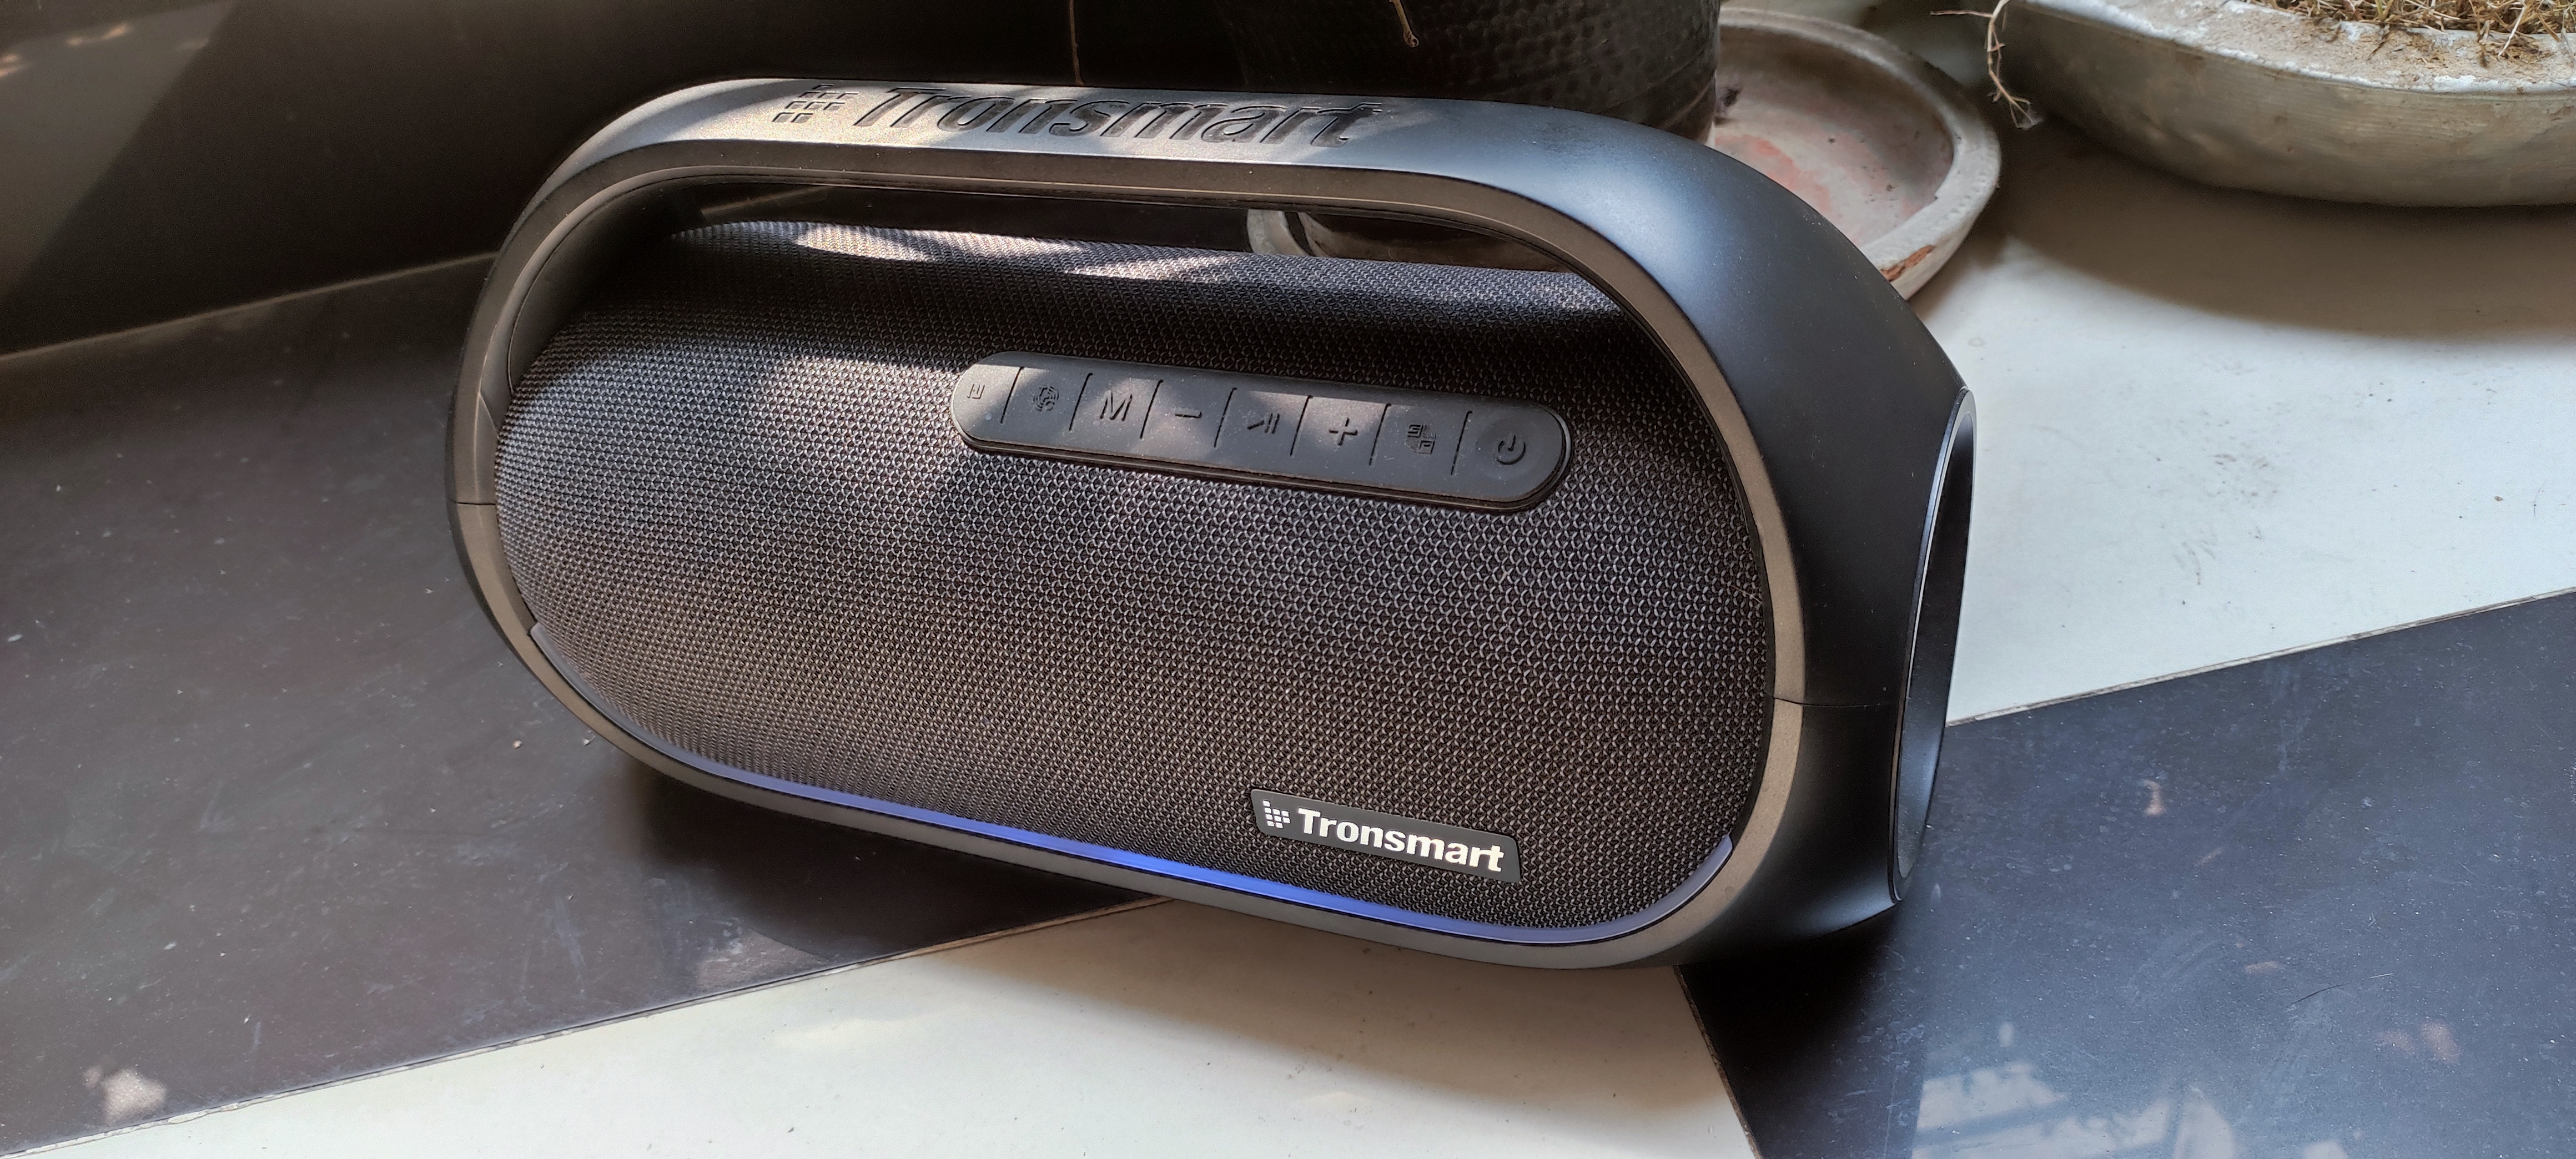 REVIEW: Tronsmart Bang Max is a versatile and quality Bluetooth speaker